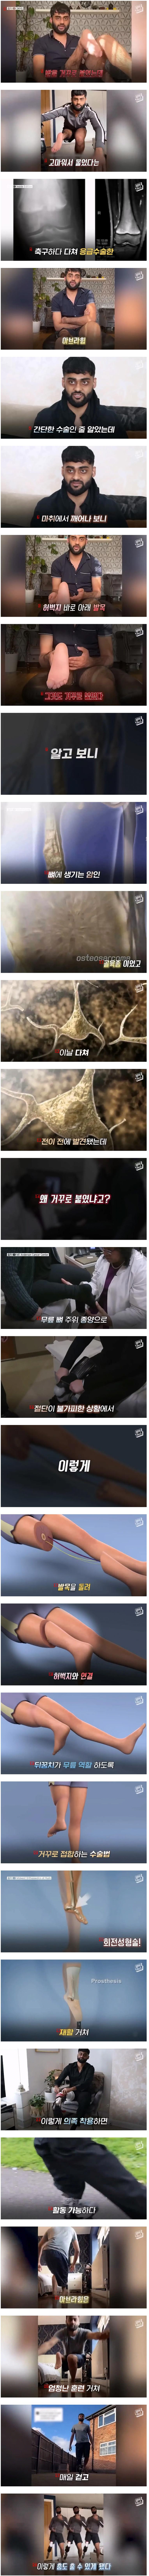 A man who cried because he was grateful when the doctor put his foot upside down